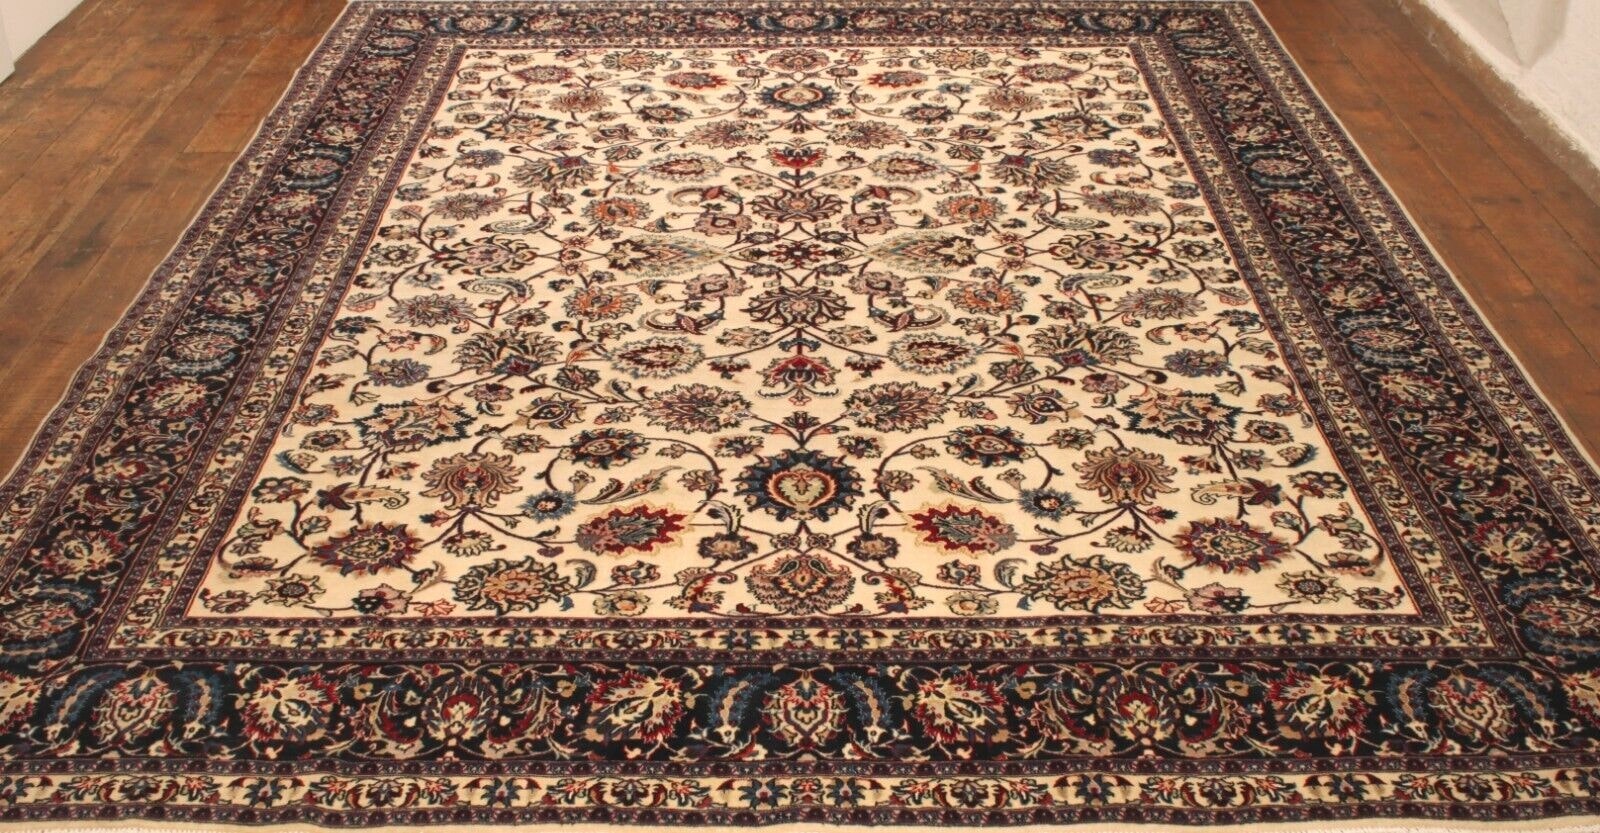 Close-up of the light beige background of the Handmade Contemporary Persian Style Tabriz Rug